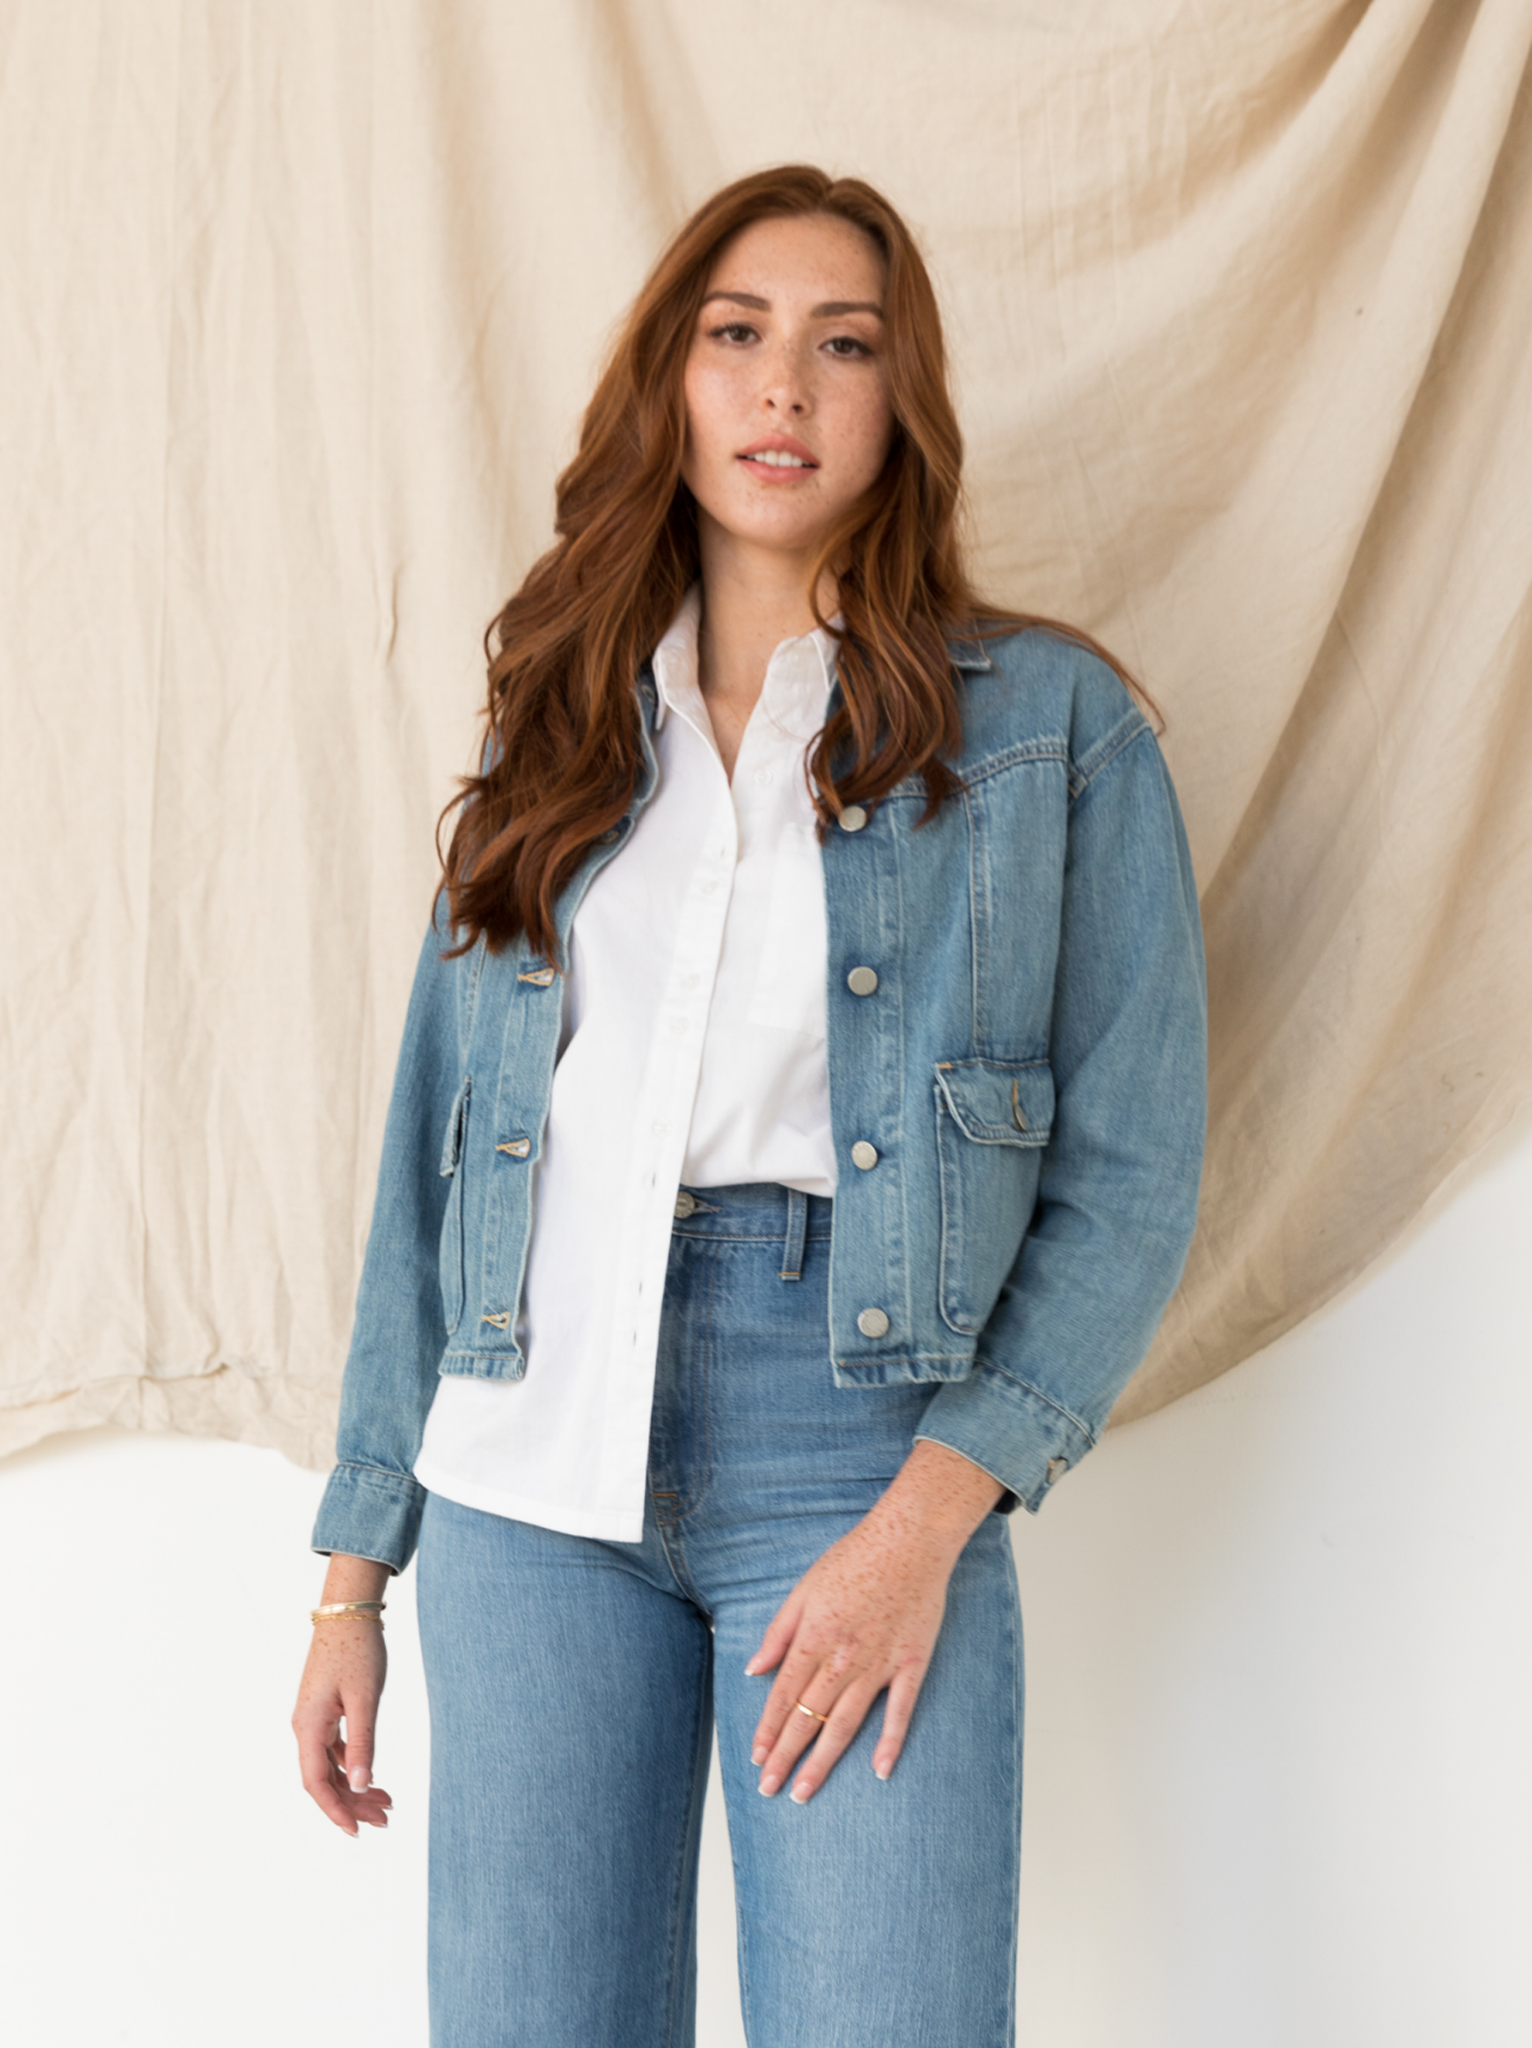 Woman in denim jacket and jeans standing against a beige backdrop.